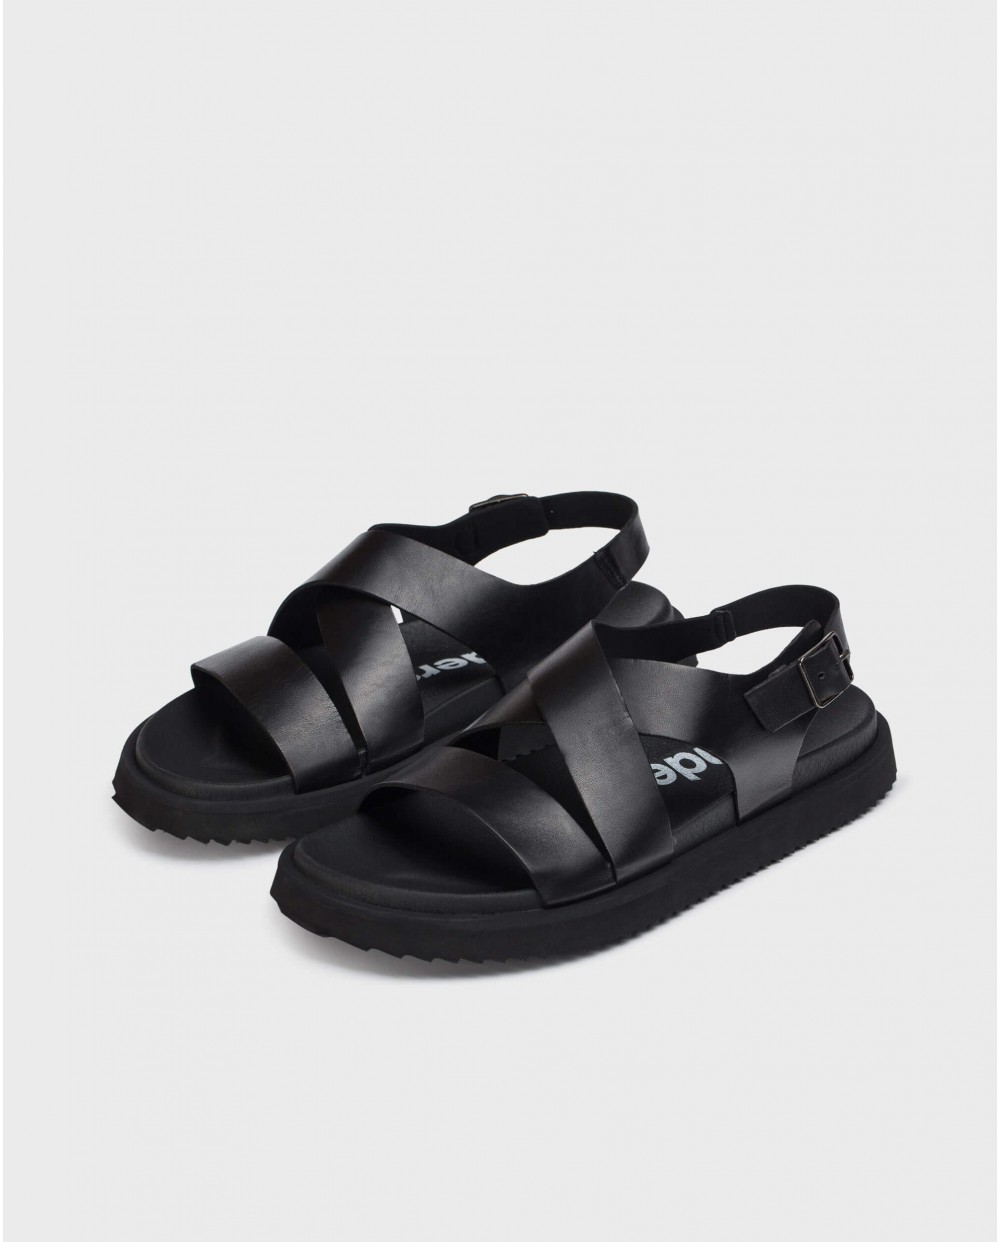 Wonders-Sandals-Leather sandal with cross over straps